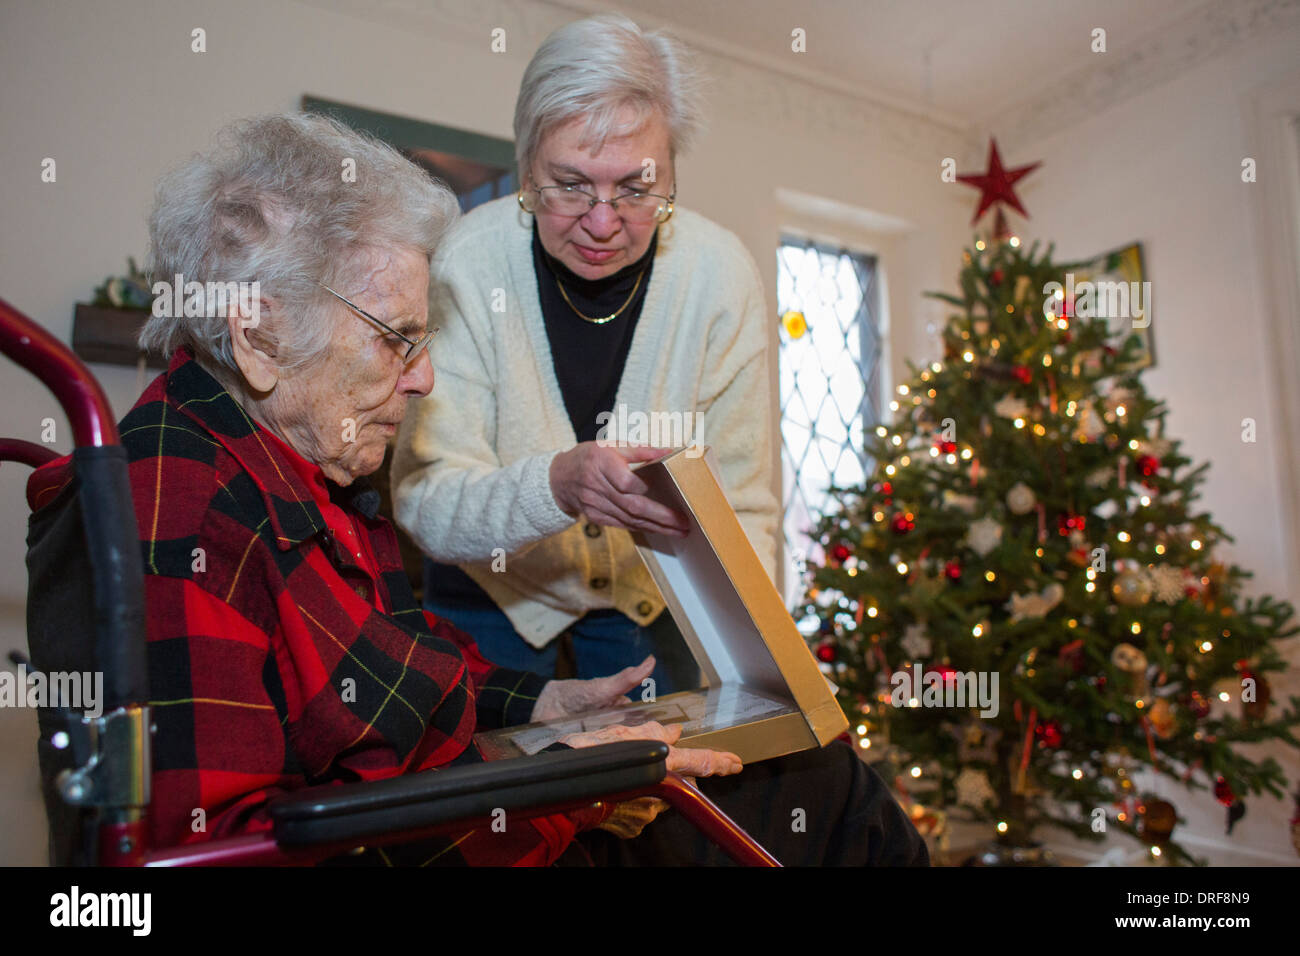 Detroit, Michigan - Dorothy Newell, 99, opens a Christmas present with the help of her daughter, Susan Newell, 65. Stock Photo